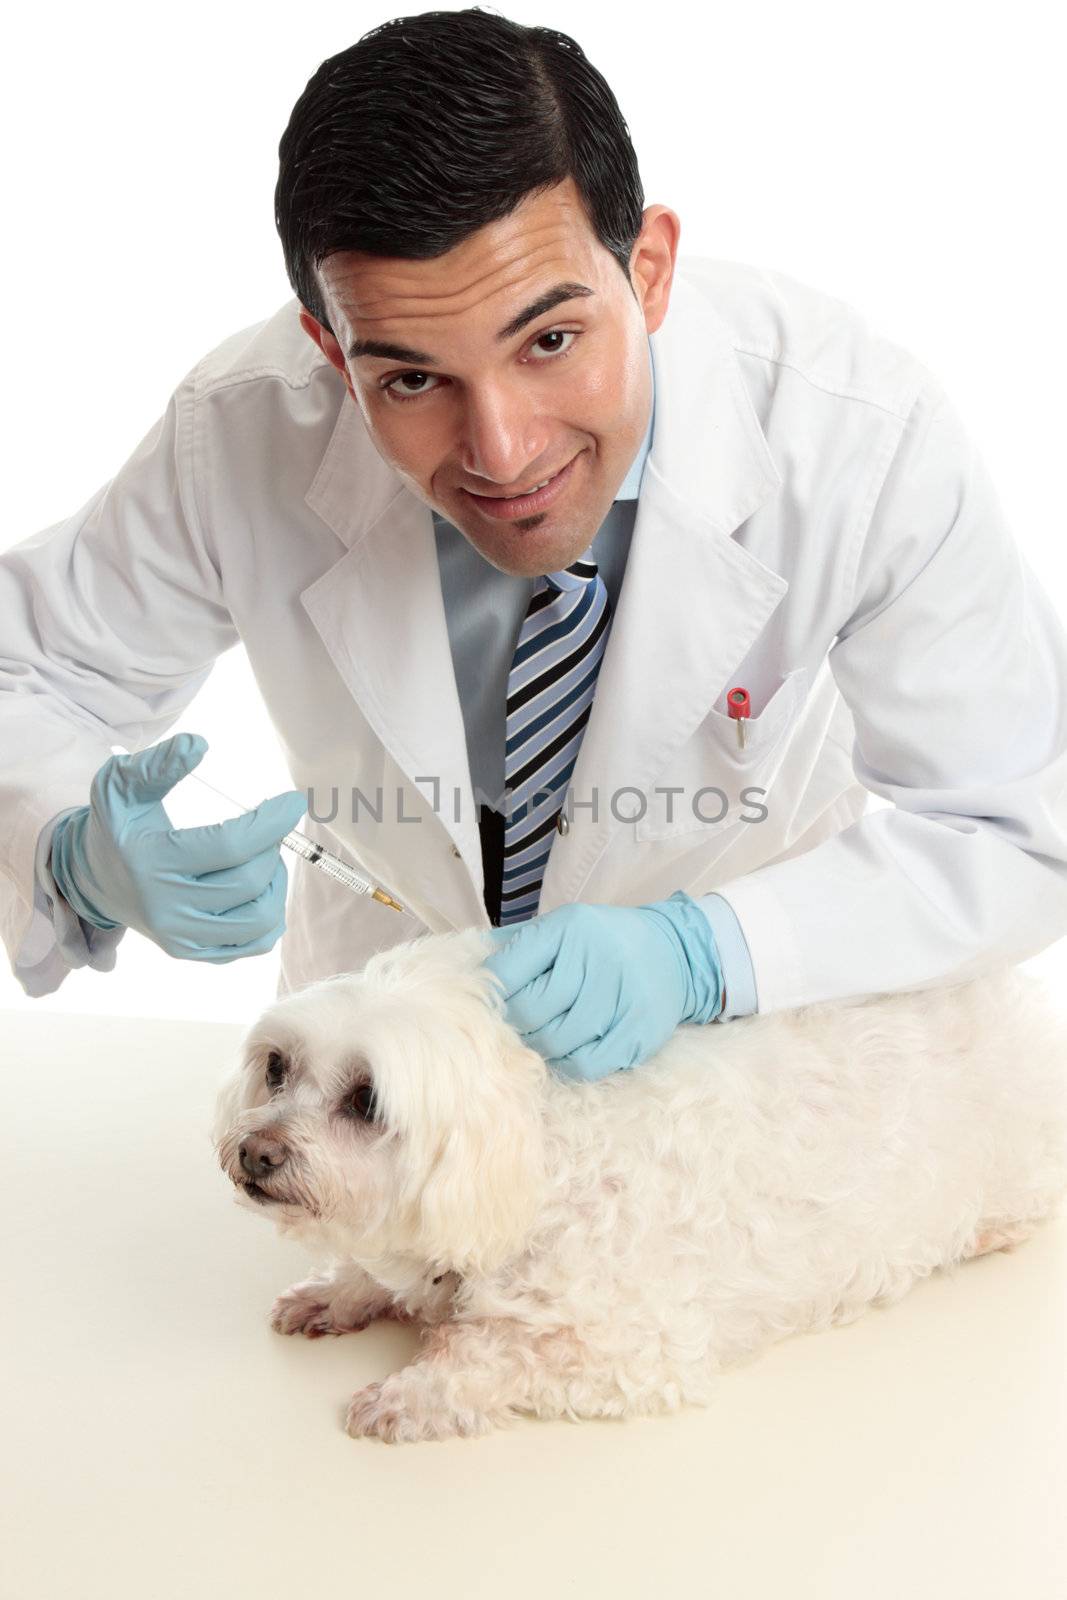 A vet treating a sick animal.  He is looking up with a friendly smile.  